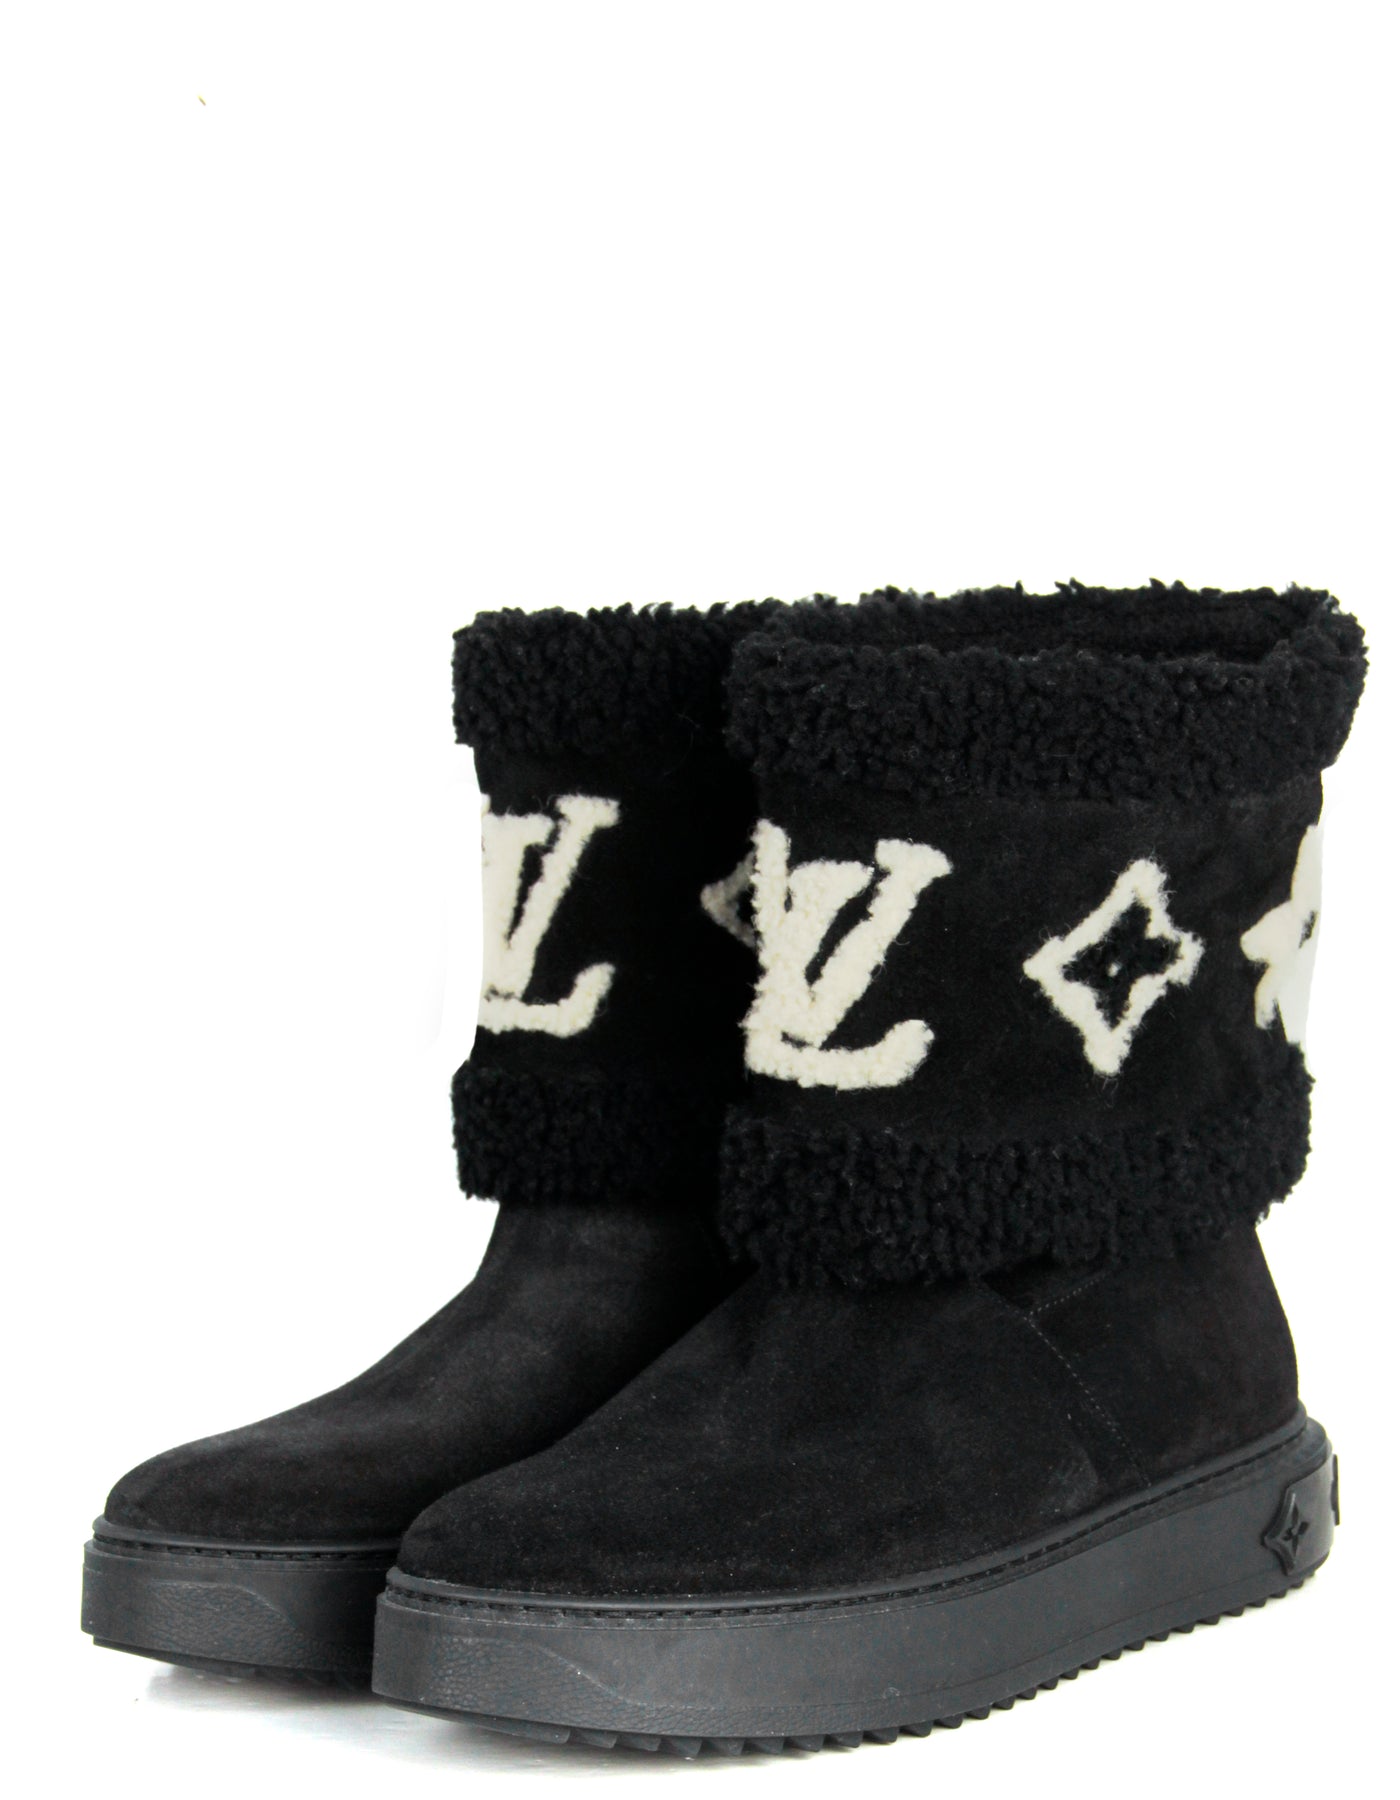 Snowdrop Flat Ankle Boots - OBSOLETES DO NOT TOUCH 1AACIB